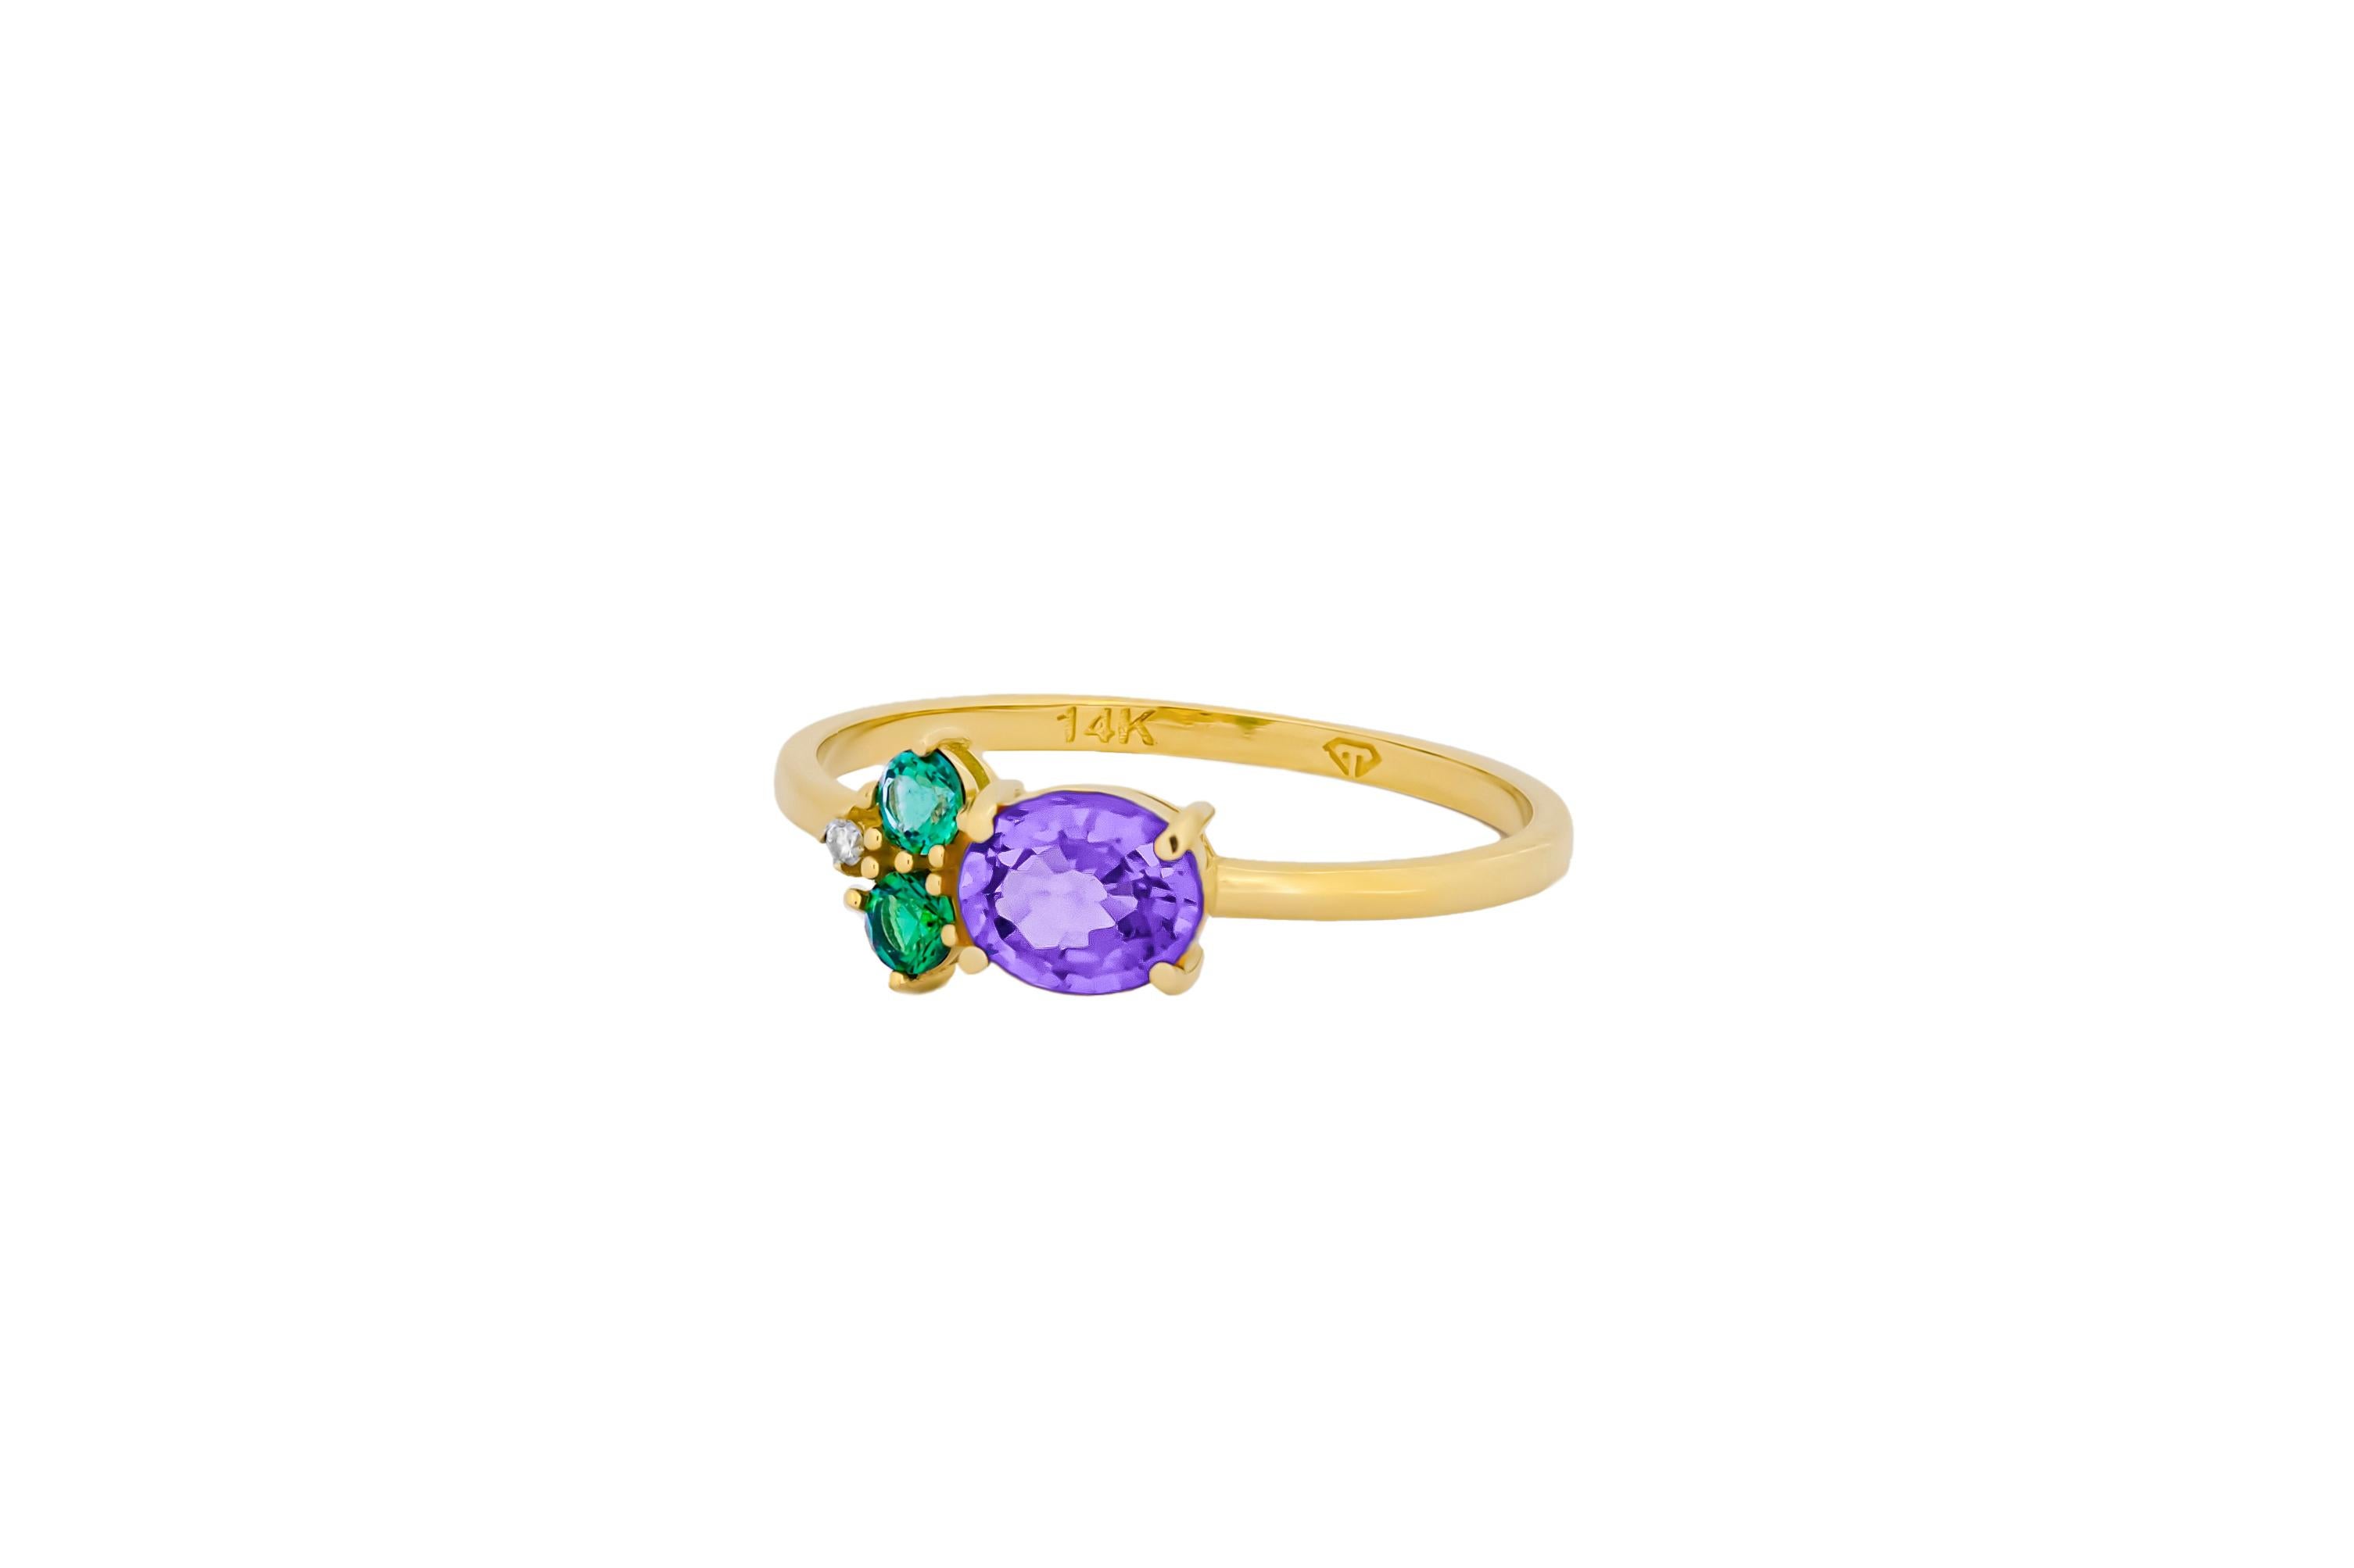 For Sale:  Oval amethyst, tsavorite and diamonds 14k gold ring. 3